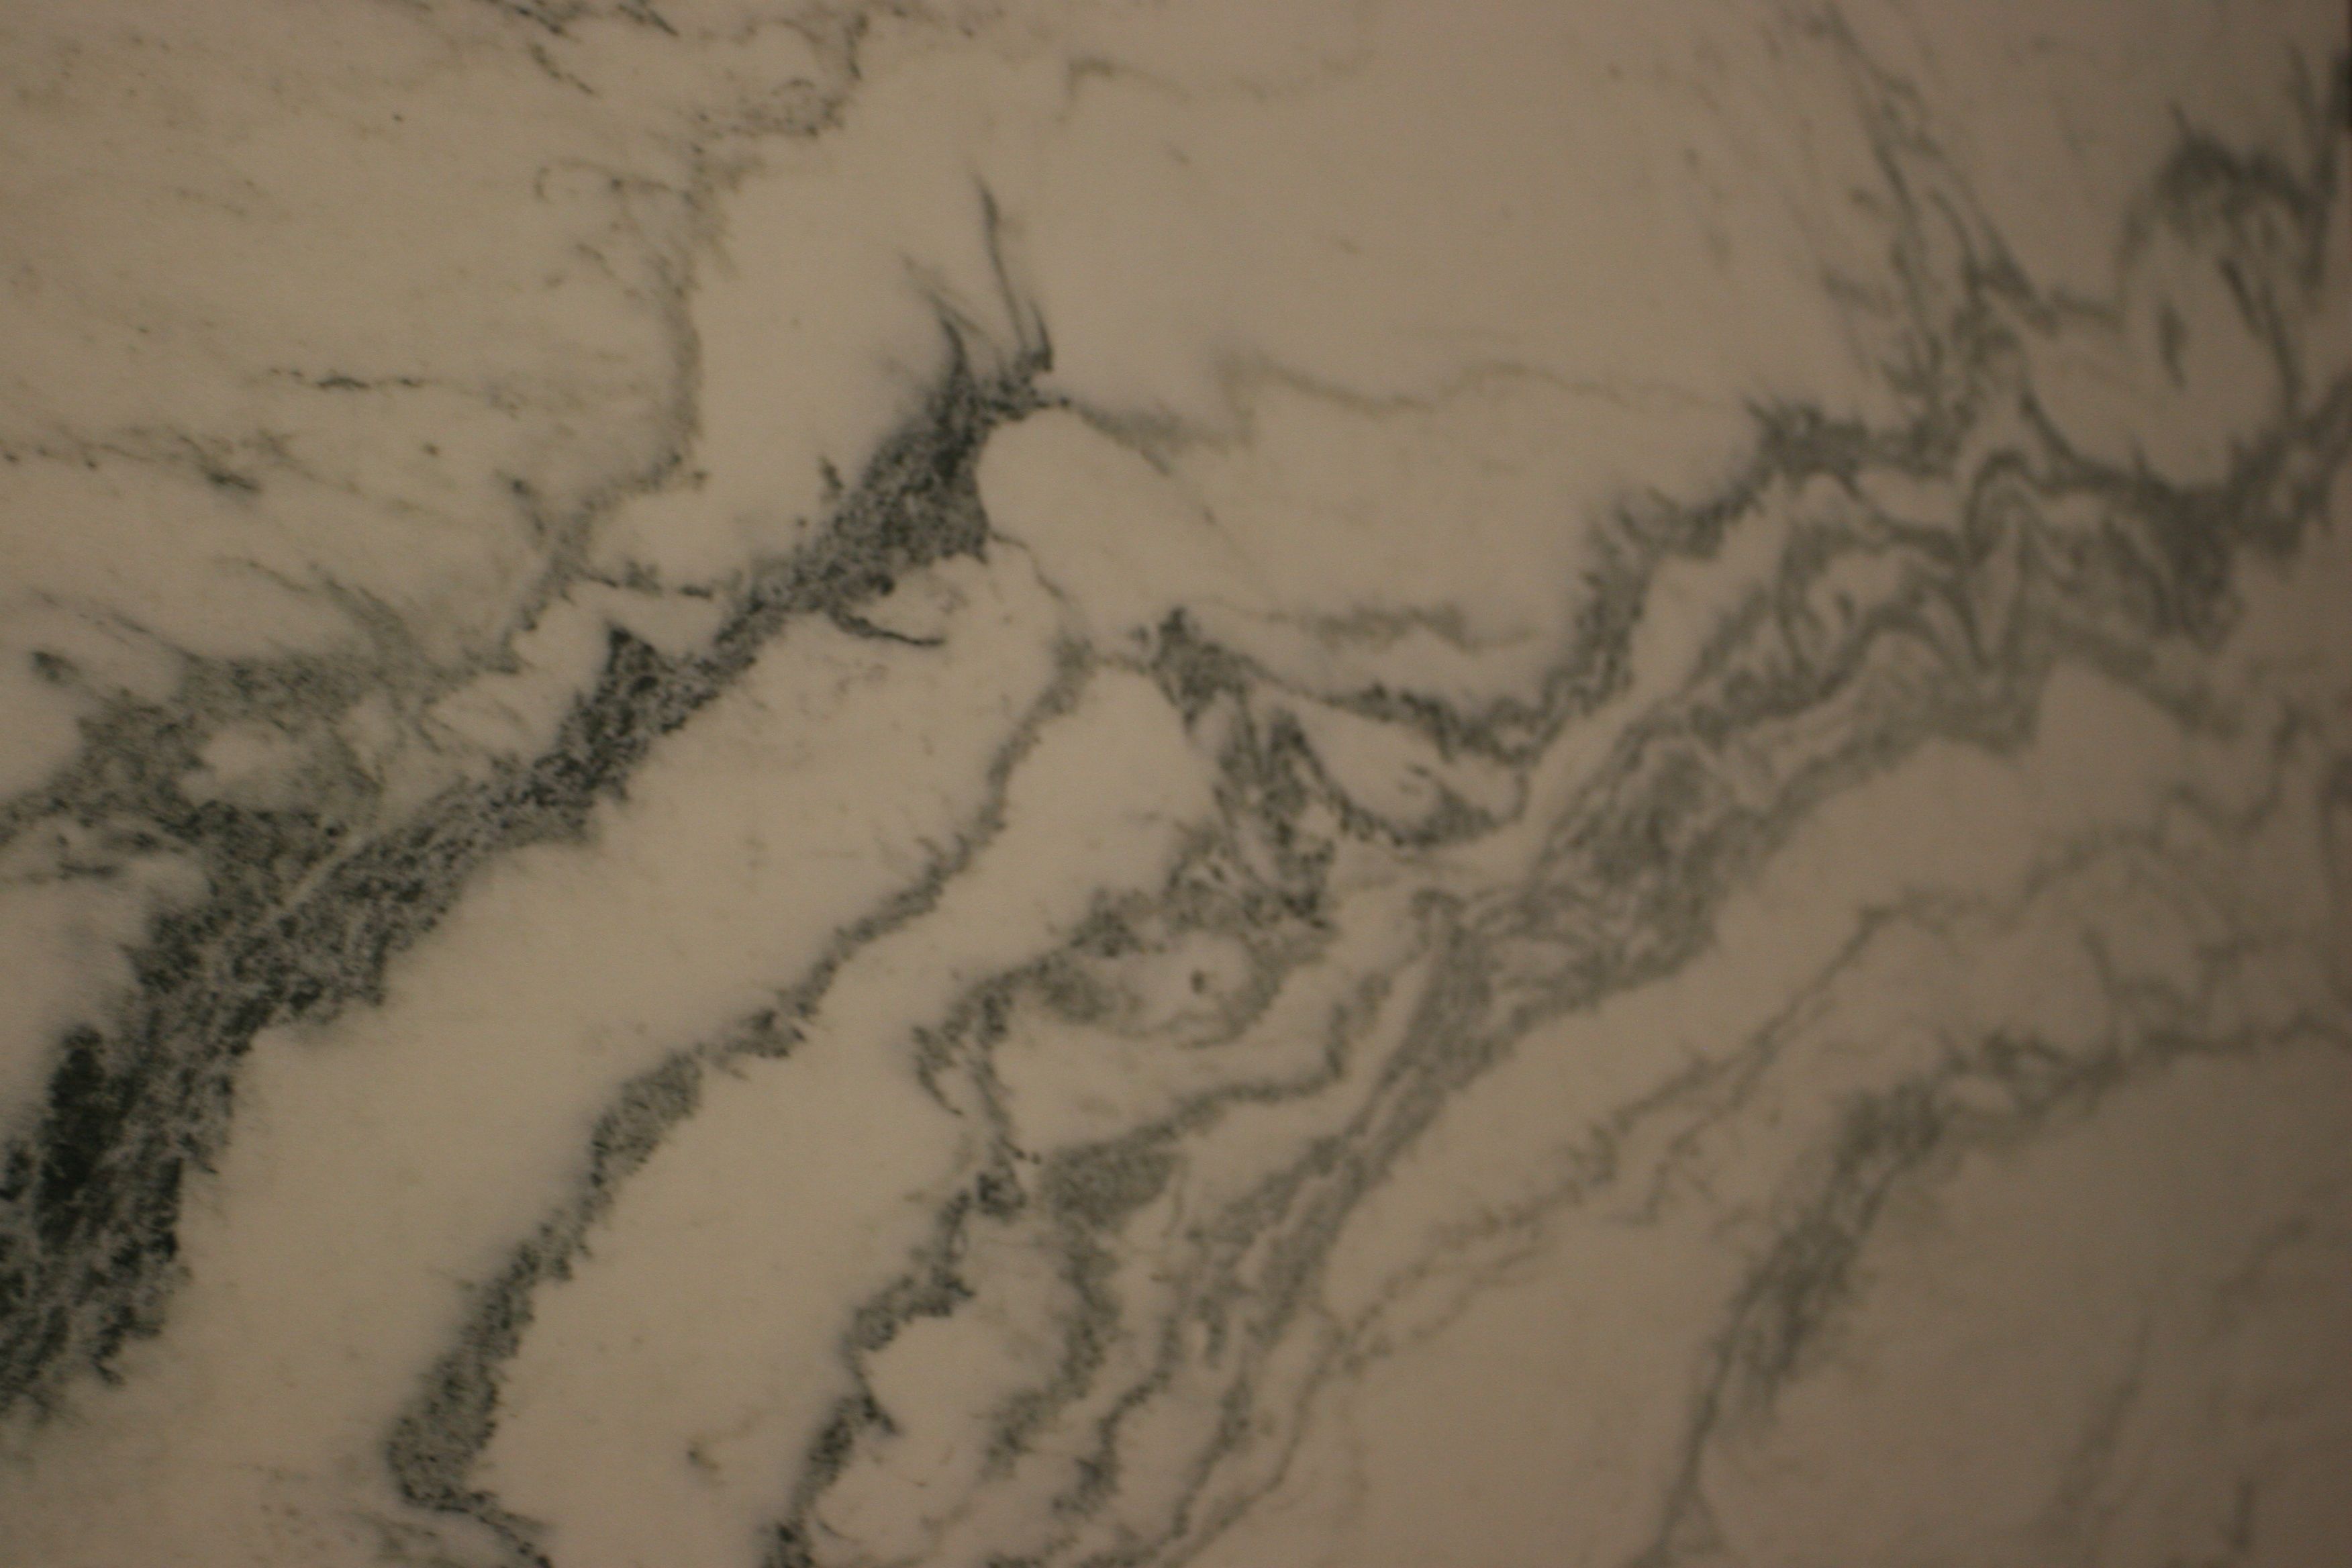 And Alex at ASN Stone turned me on to this marble look-a-like: Vermont Danby.